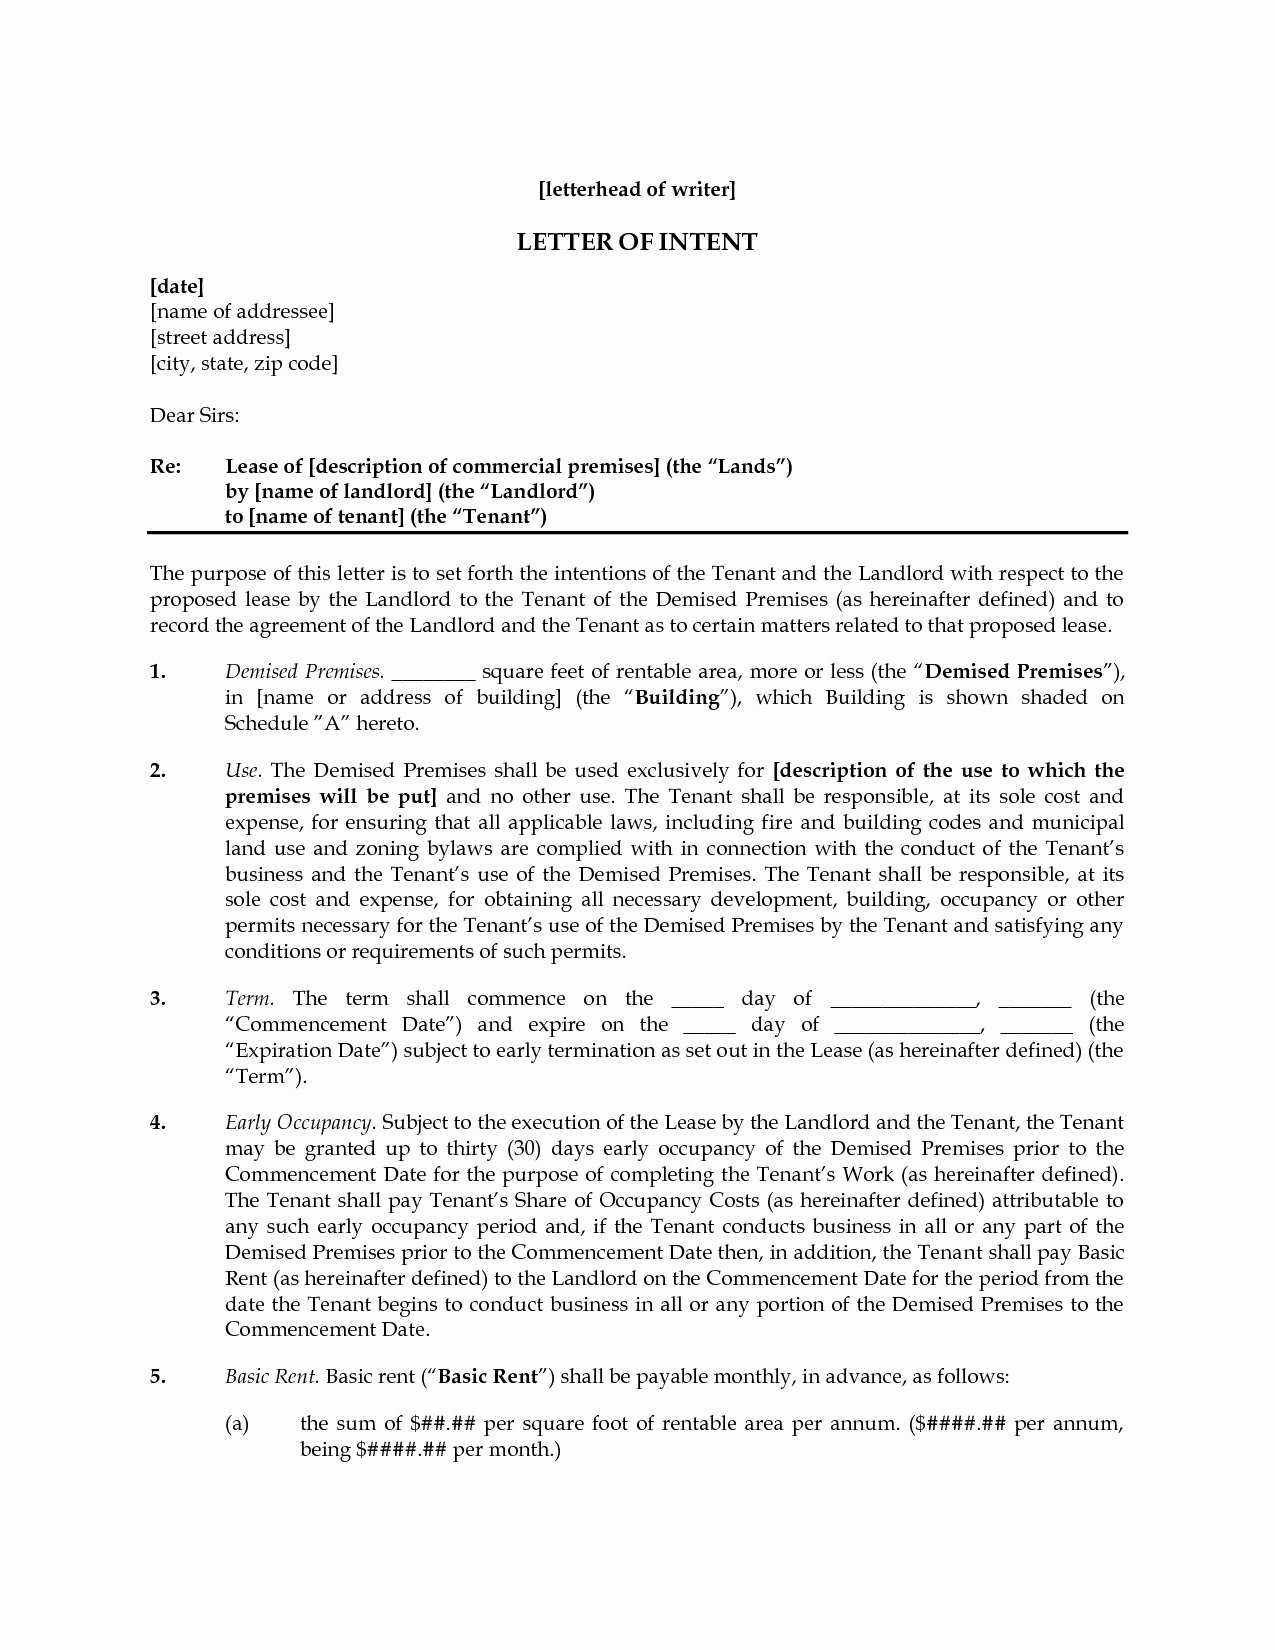 Rental Letter Of Intent New Letter Intent to Lease Mercial Property Template